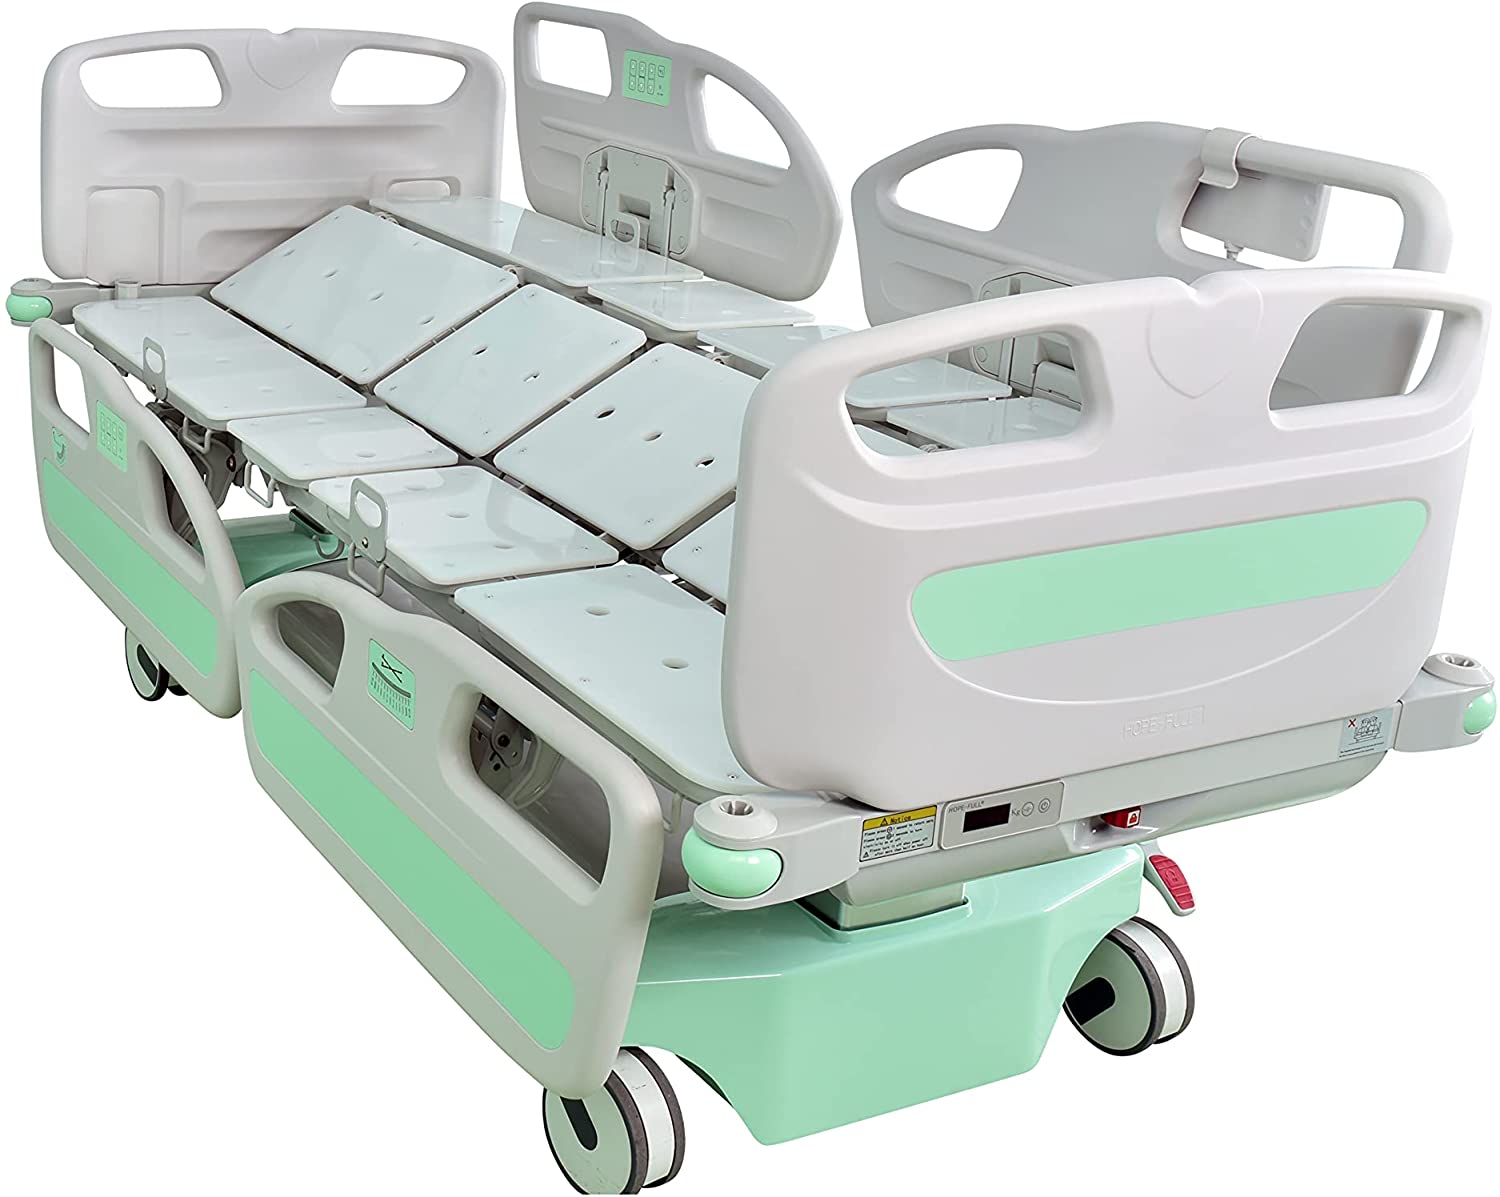 Full-Electric Hospital Bed with microAIR MA900 Lateral Rotation Mattress